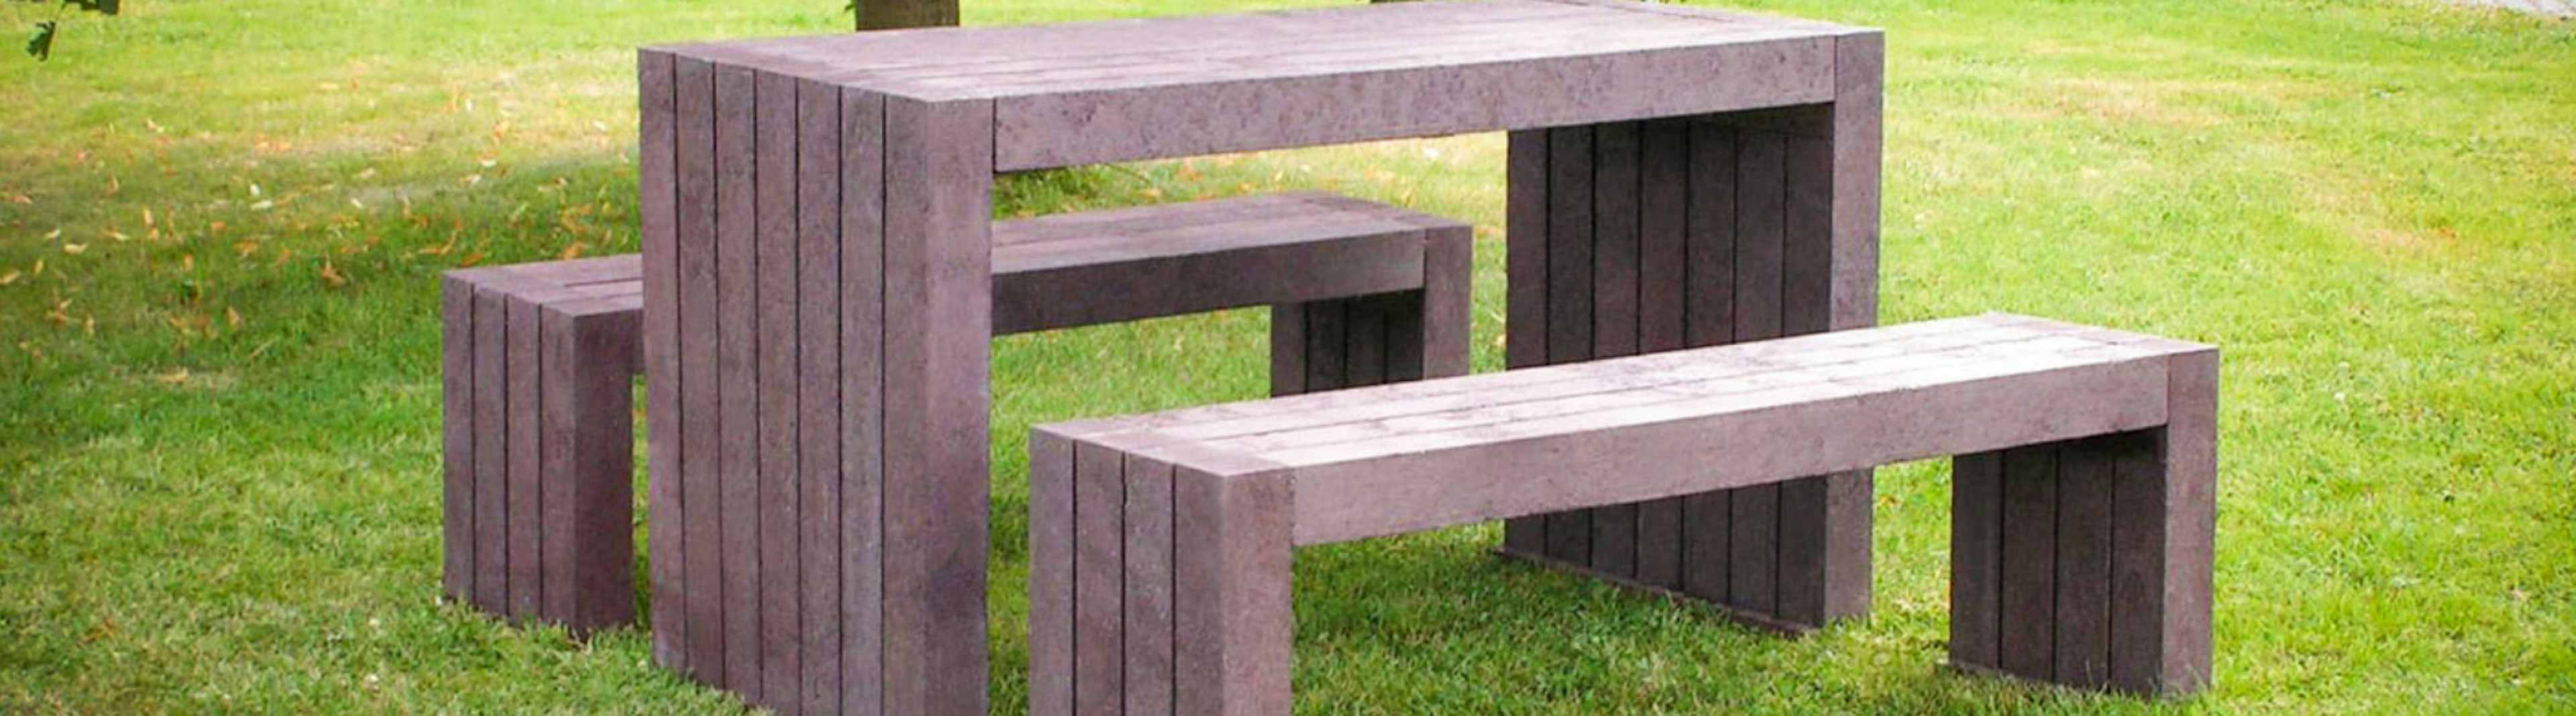 Benches and table - park furniture